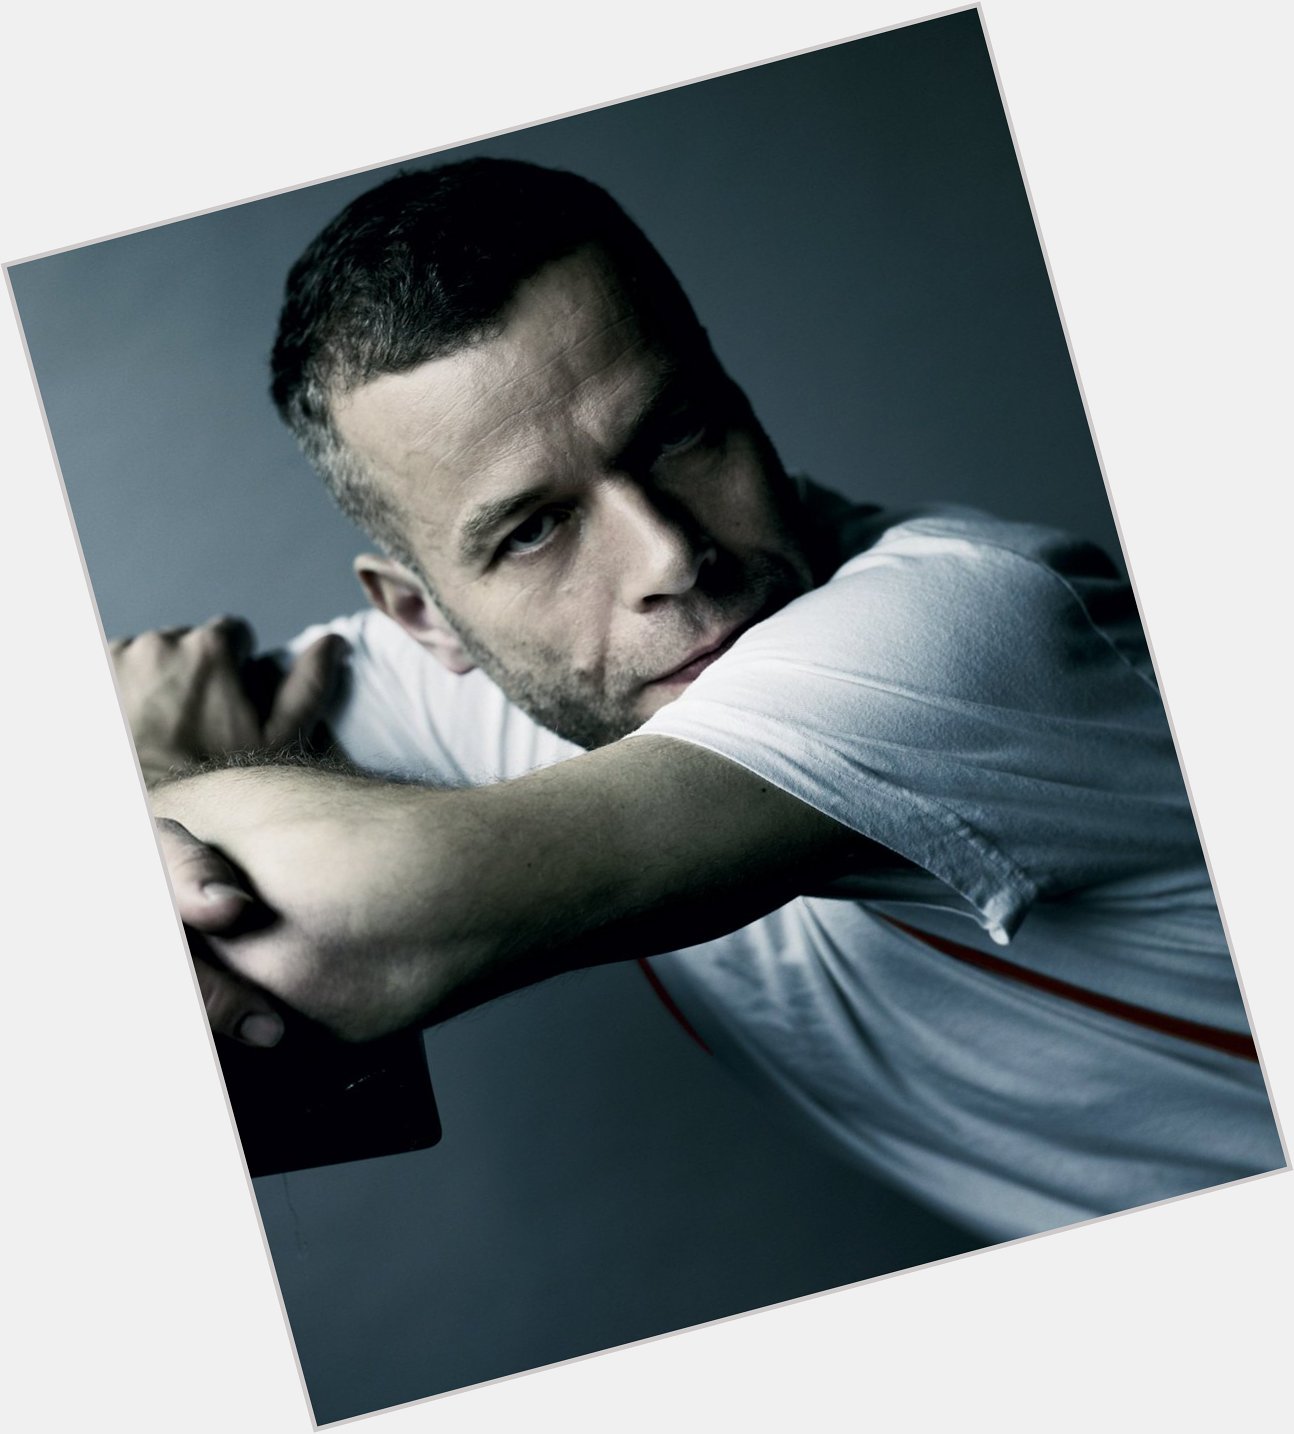 And lastly, Happy Birthday to photographer Wolfgang Tillmans Xx 